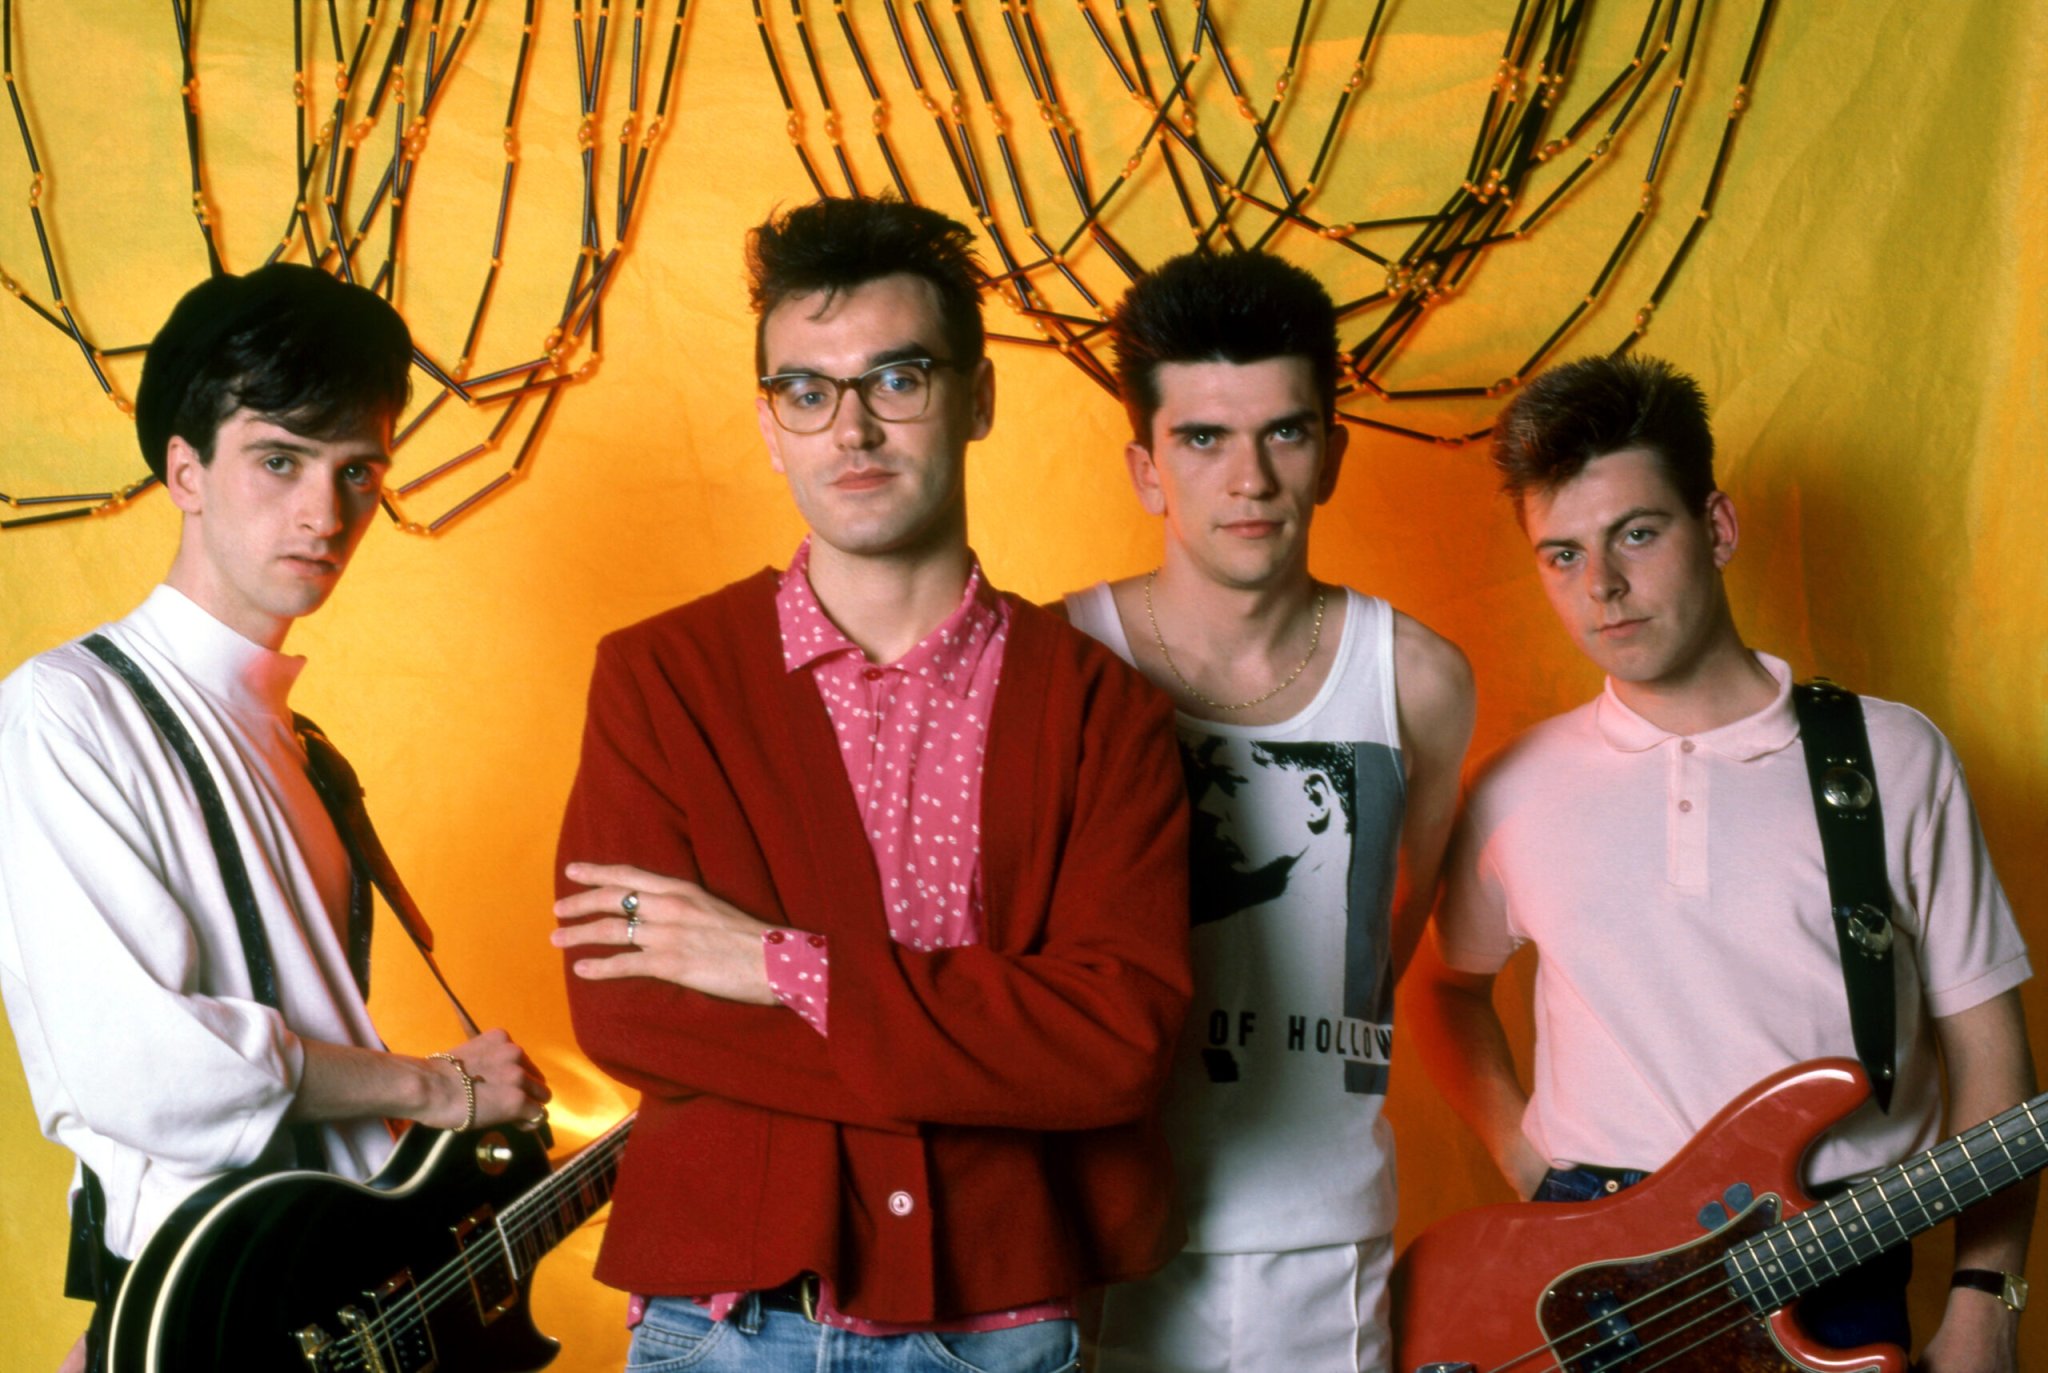 Former Smiths Bandmates Morrissey, Johnny Marr, Mike Joyce Salute Andy Rourke - Spin